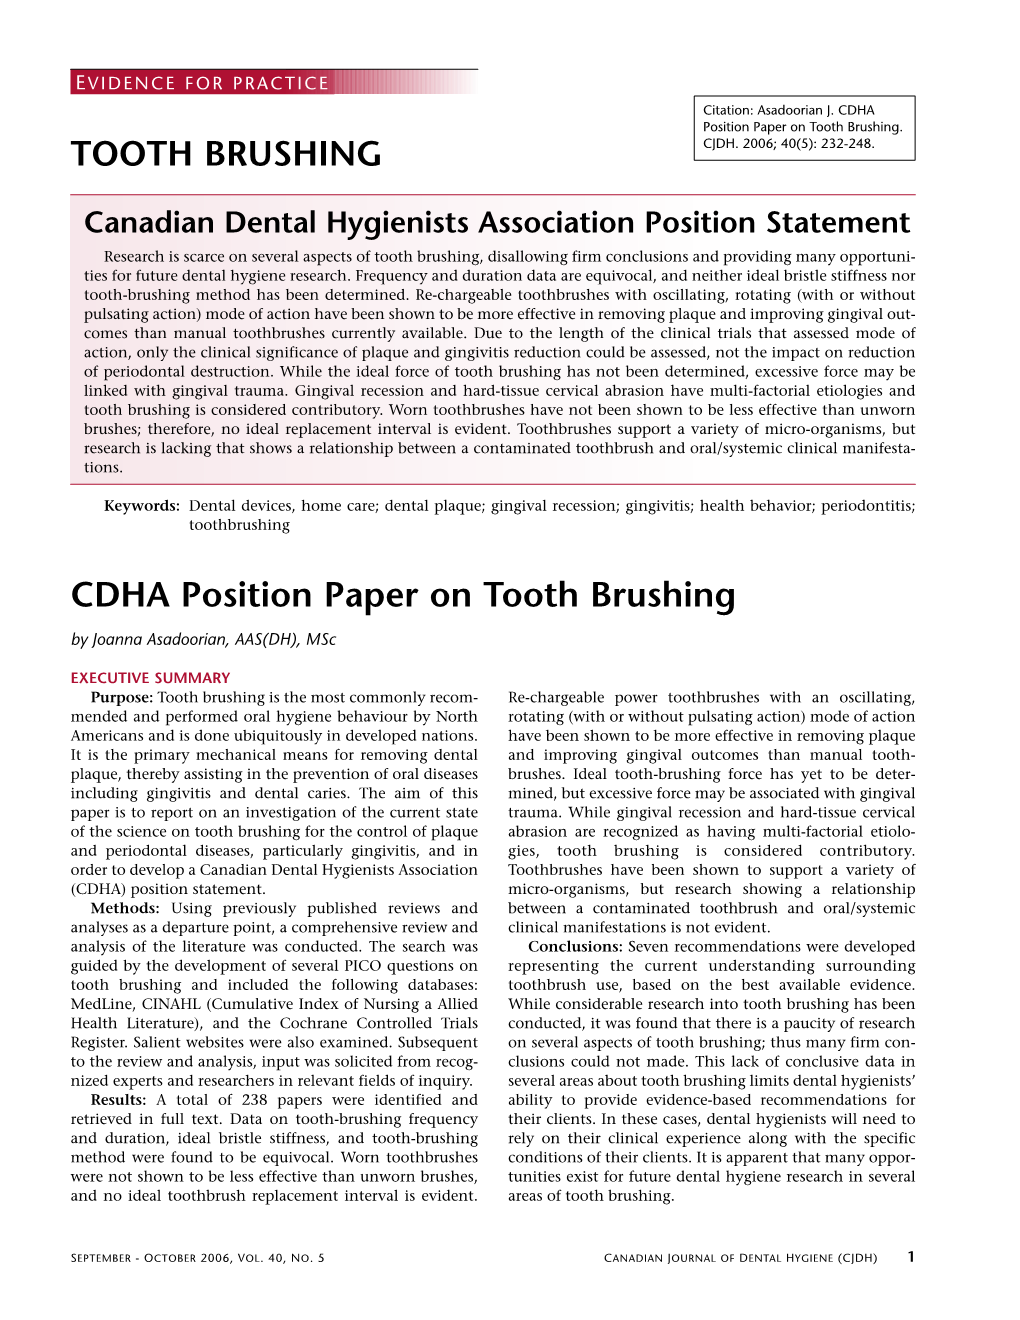 CDHA Position Paper on Tooth Brushing